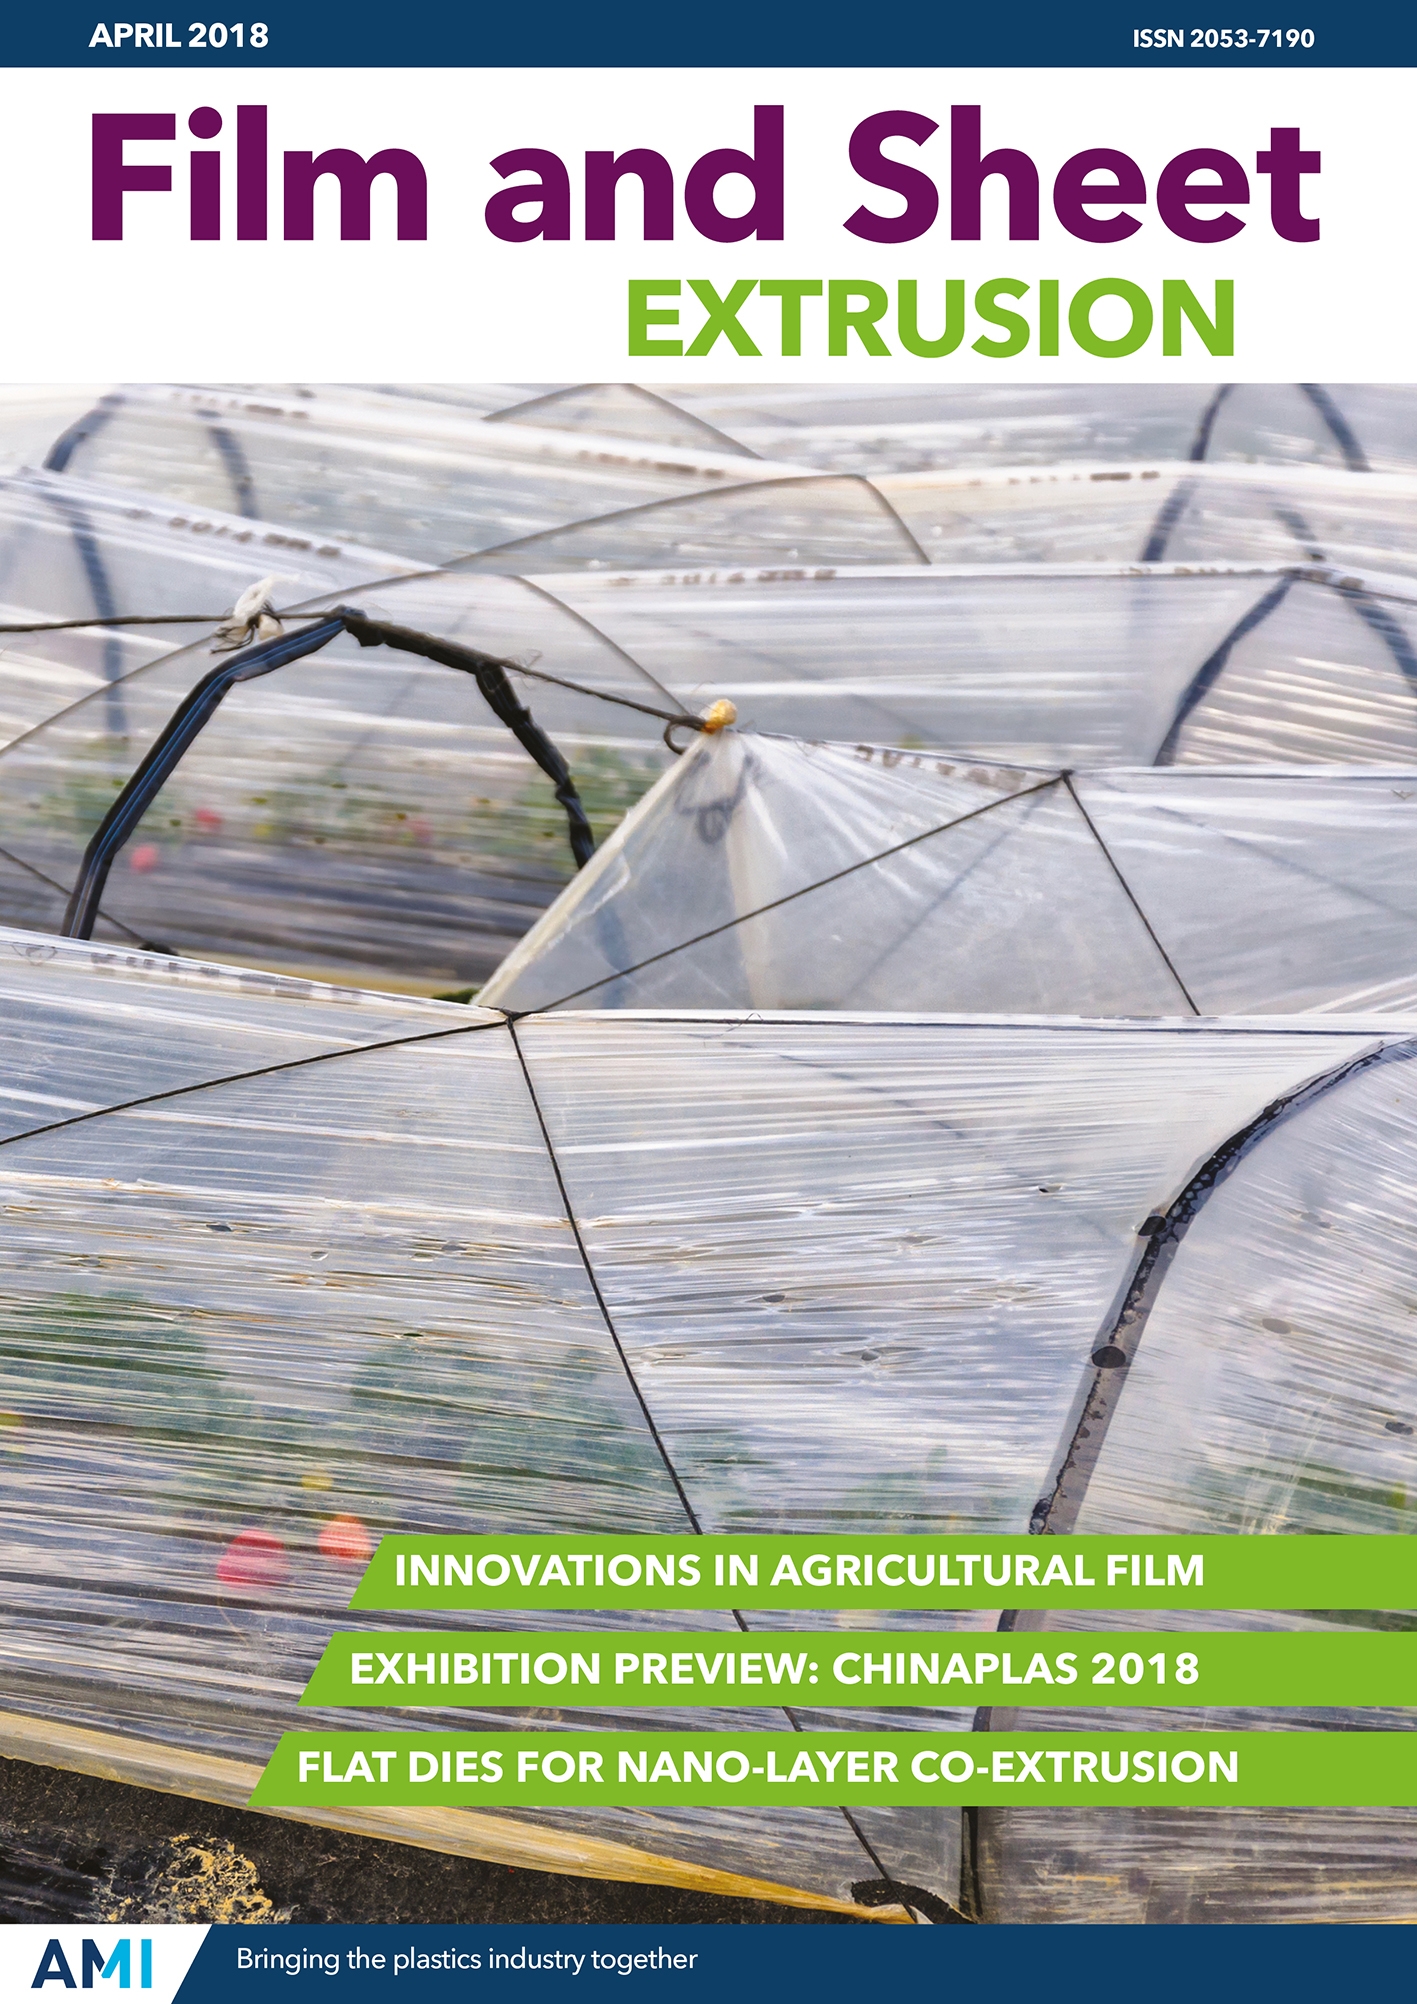 Film and Sheet Extrusion April 2018